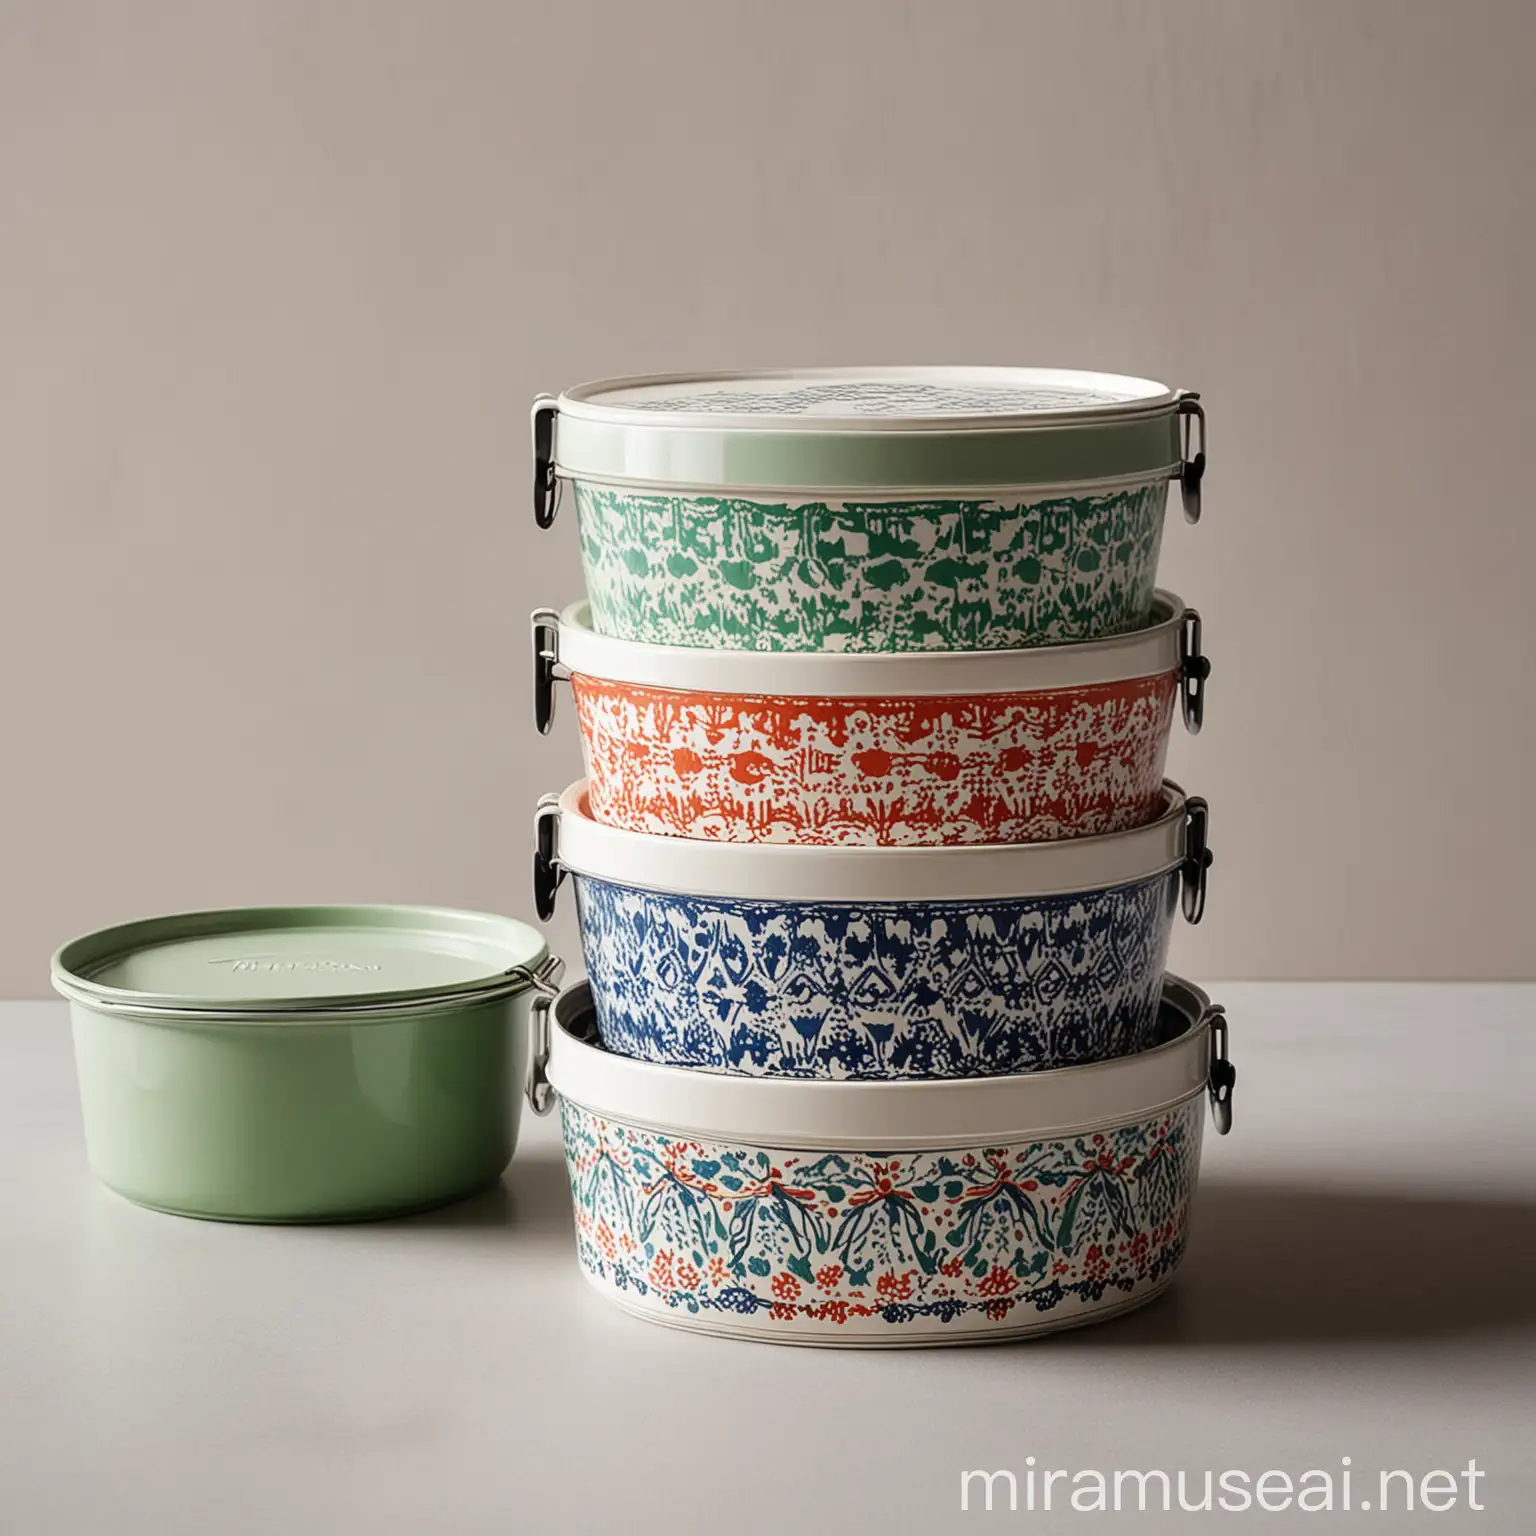 Modern Western Print Tiffin Designs for Sustainable Food Delivery SustainaBowl